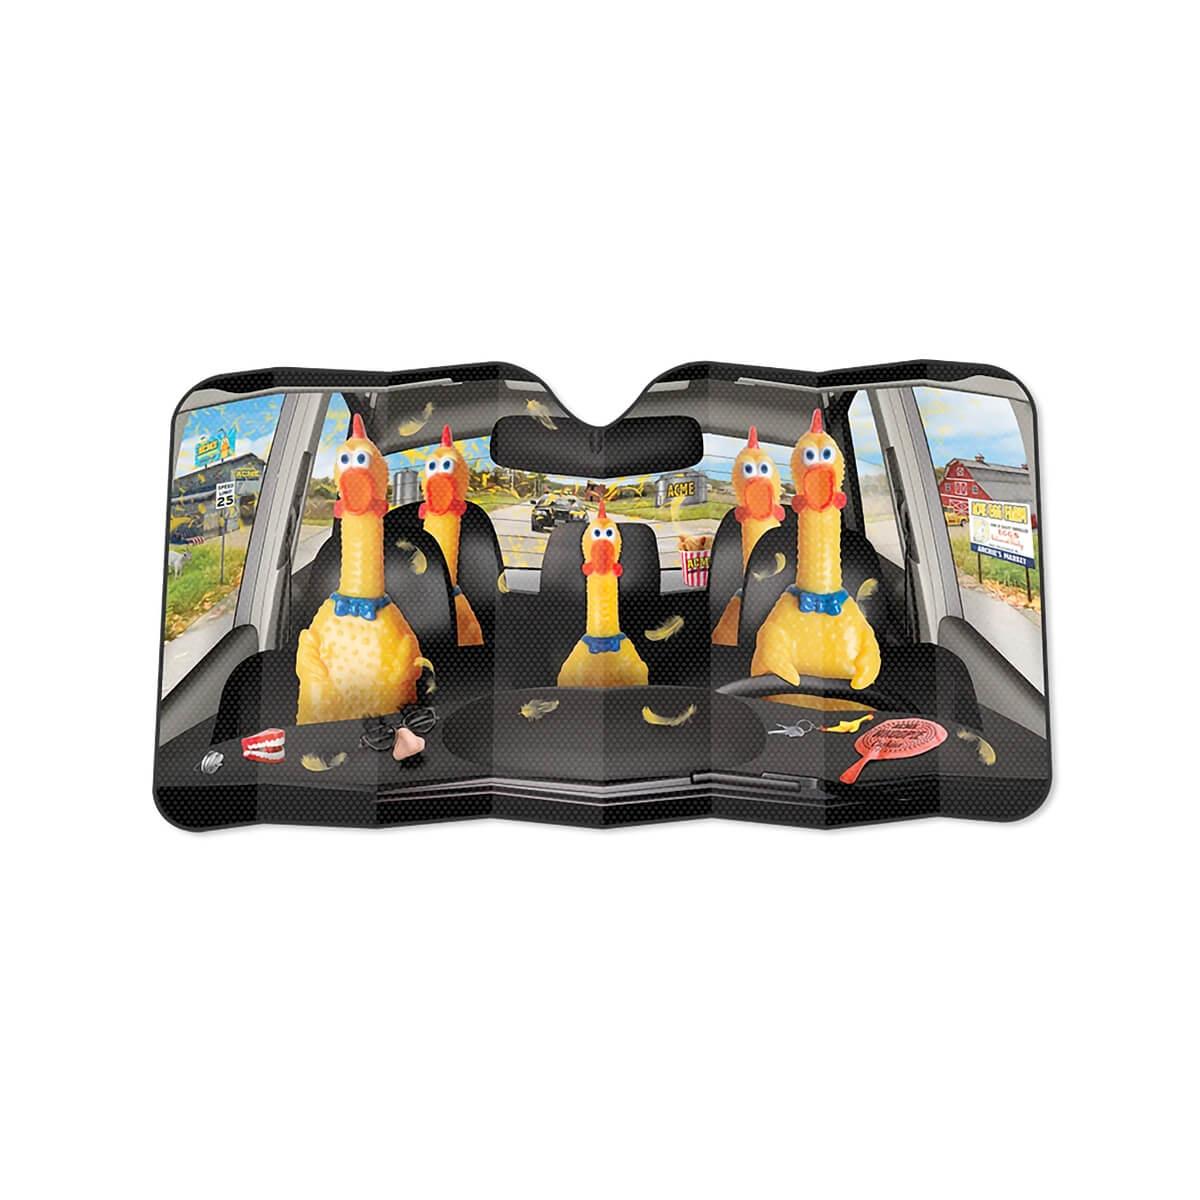  Car Full Of Rubber Chickens Auto Sunshade